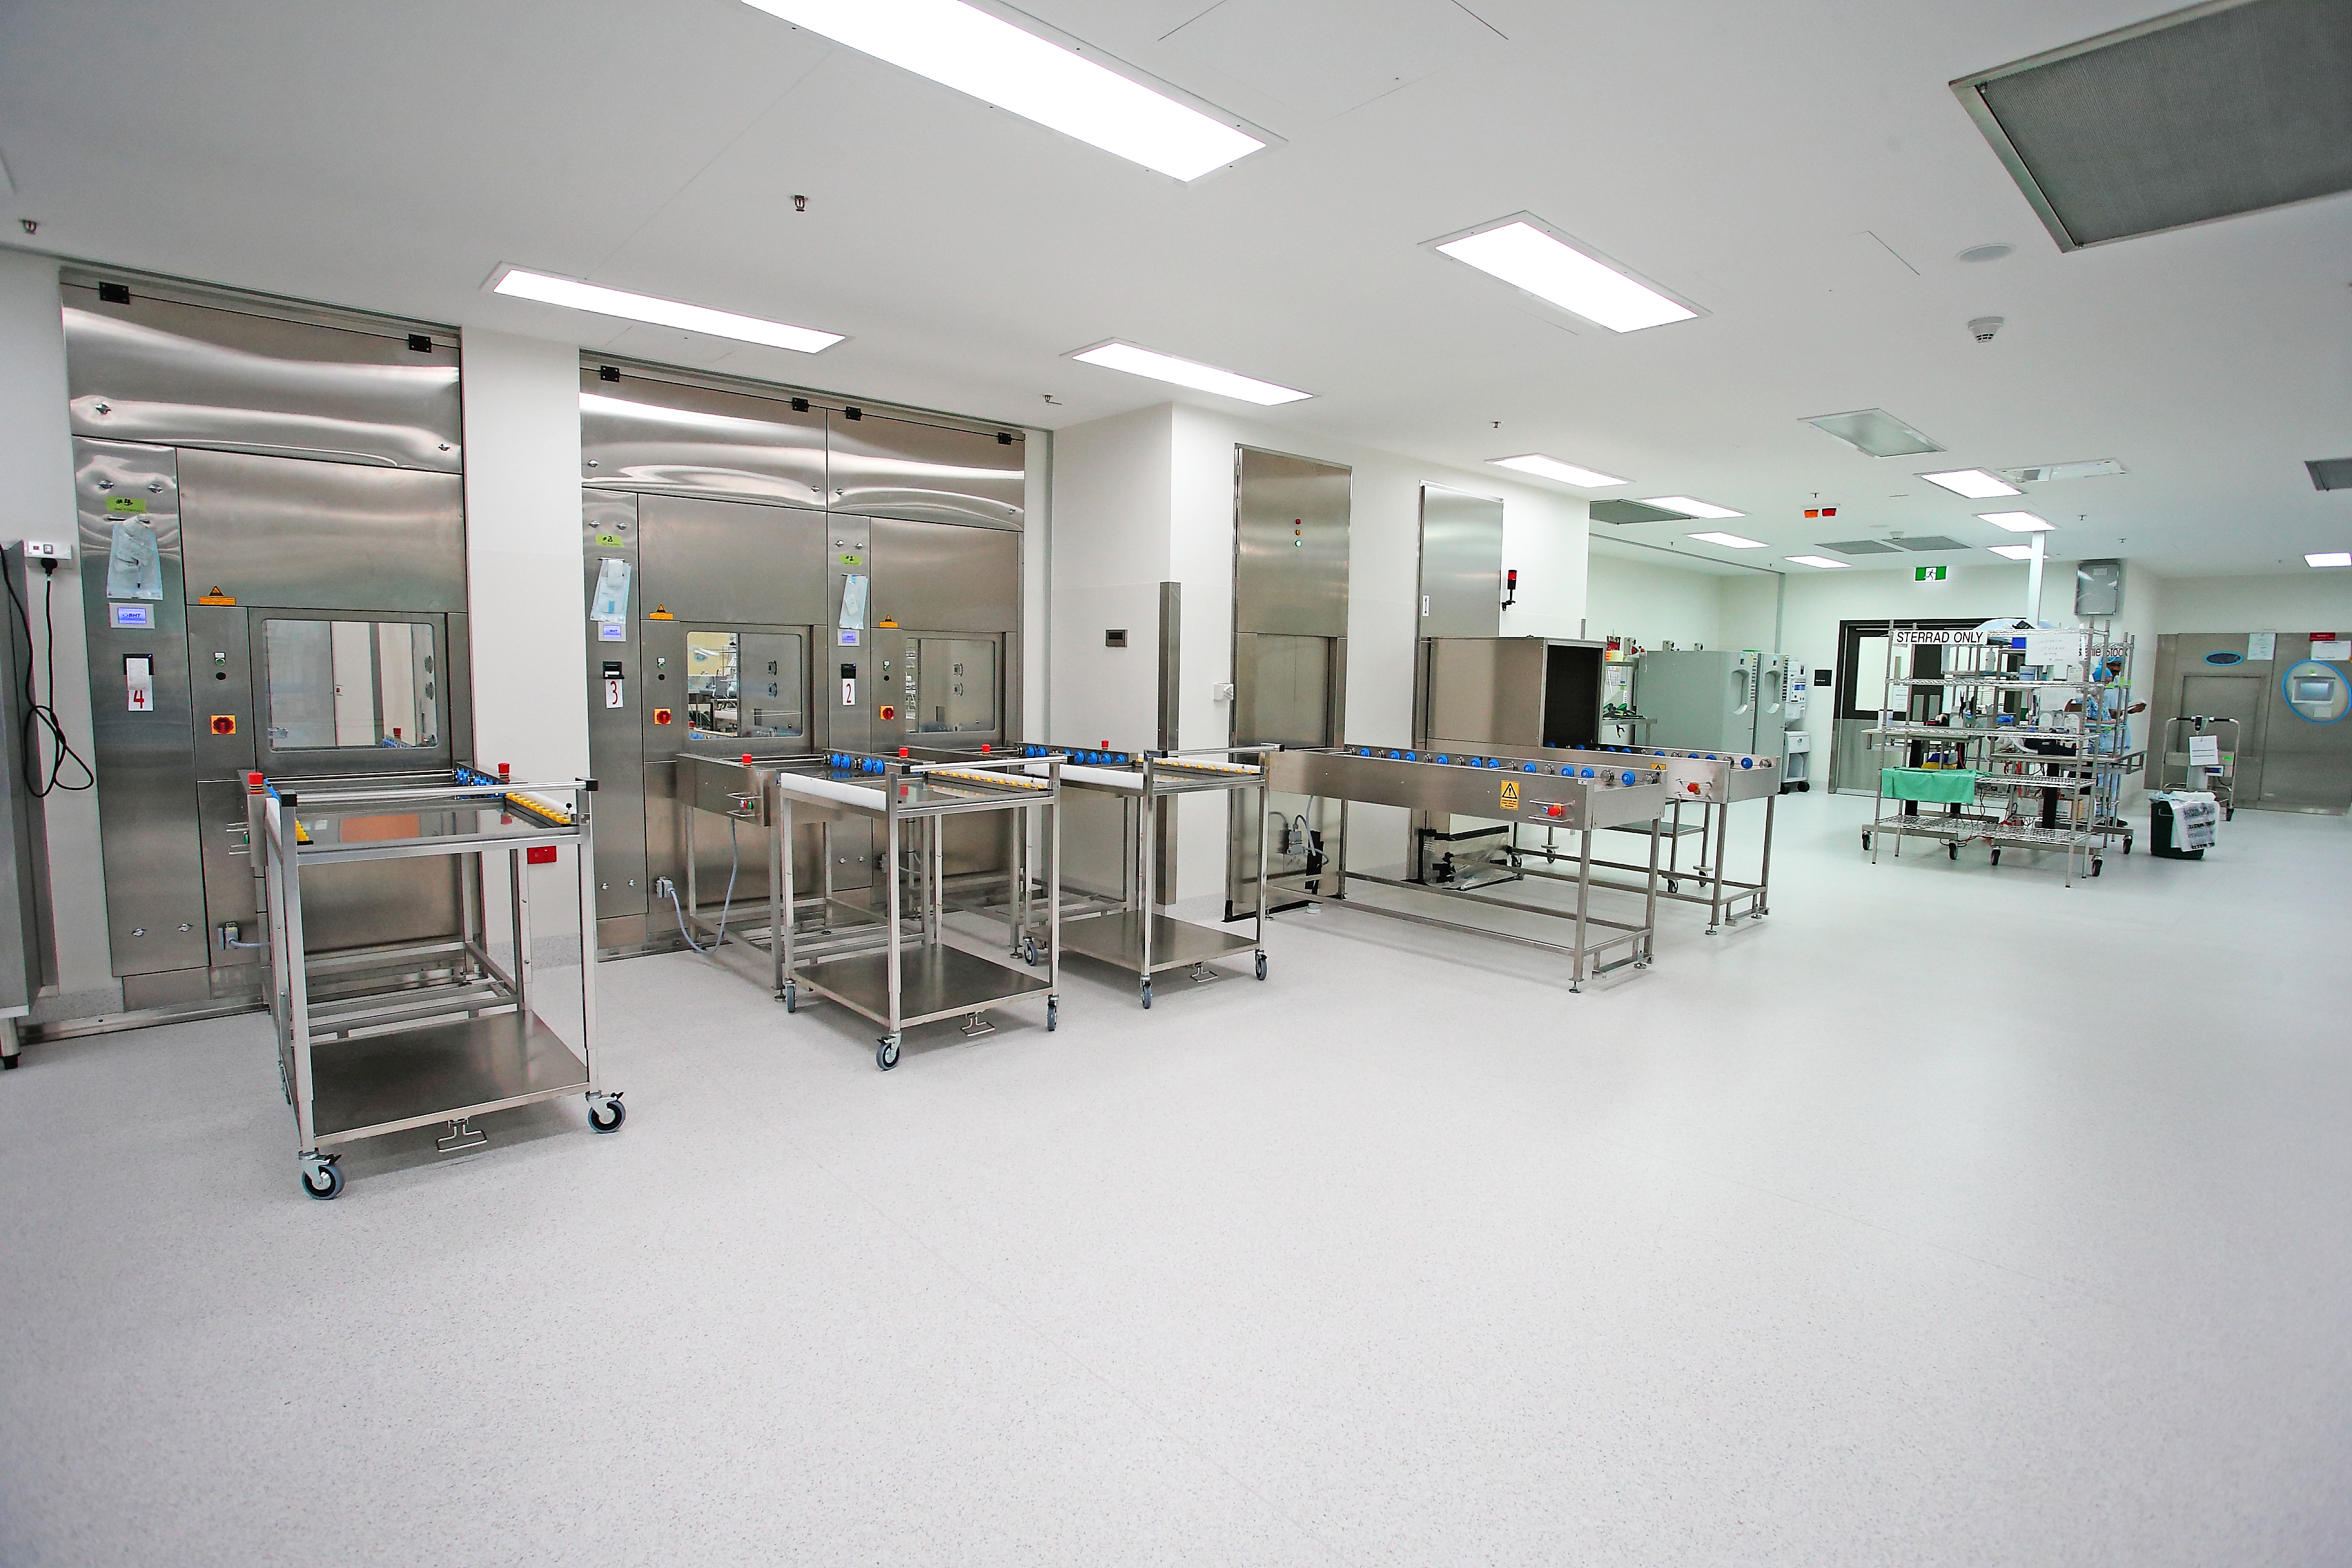 Townsville Hospital Central Sterile Supply Department (CSSD) Upgrade